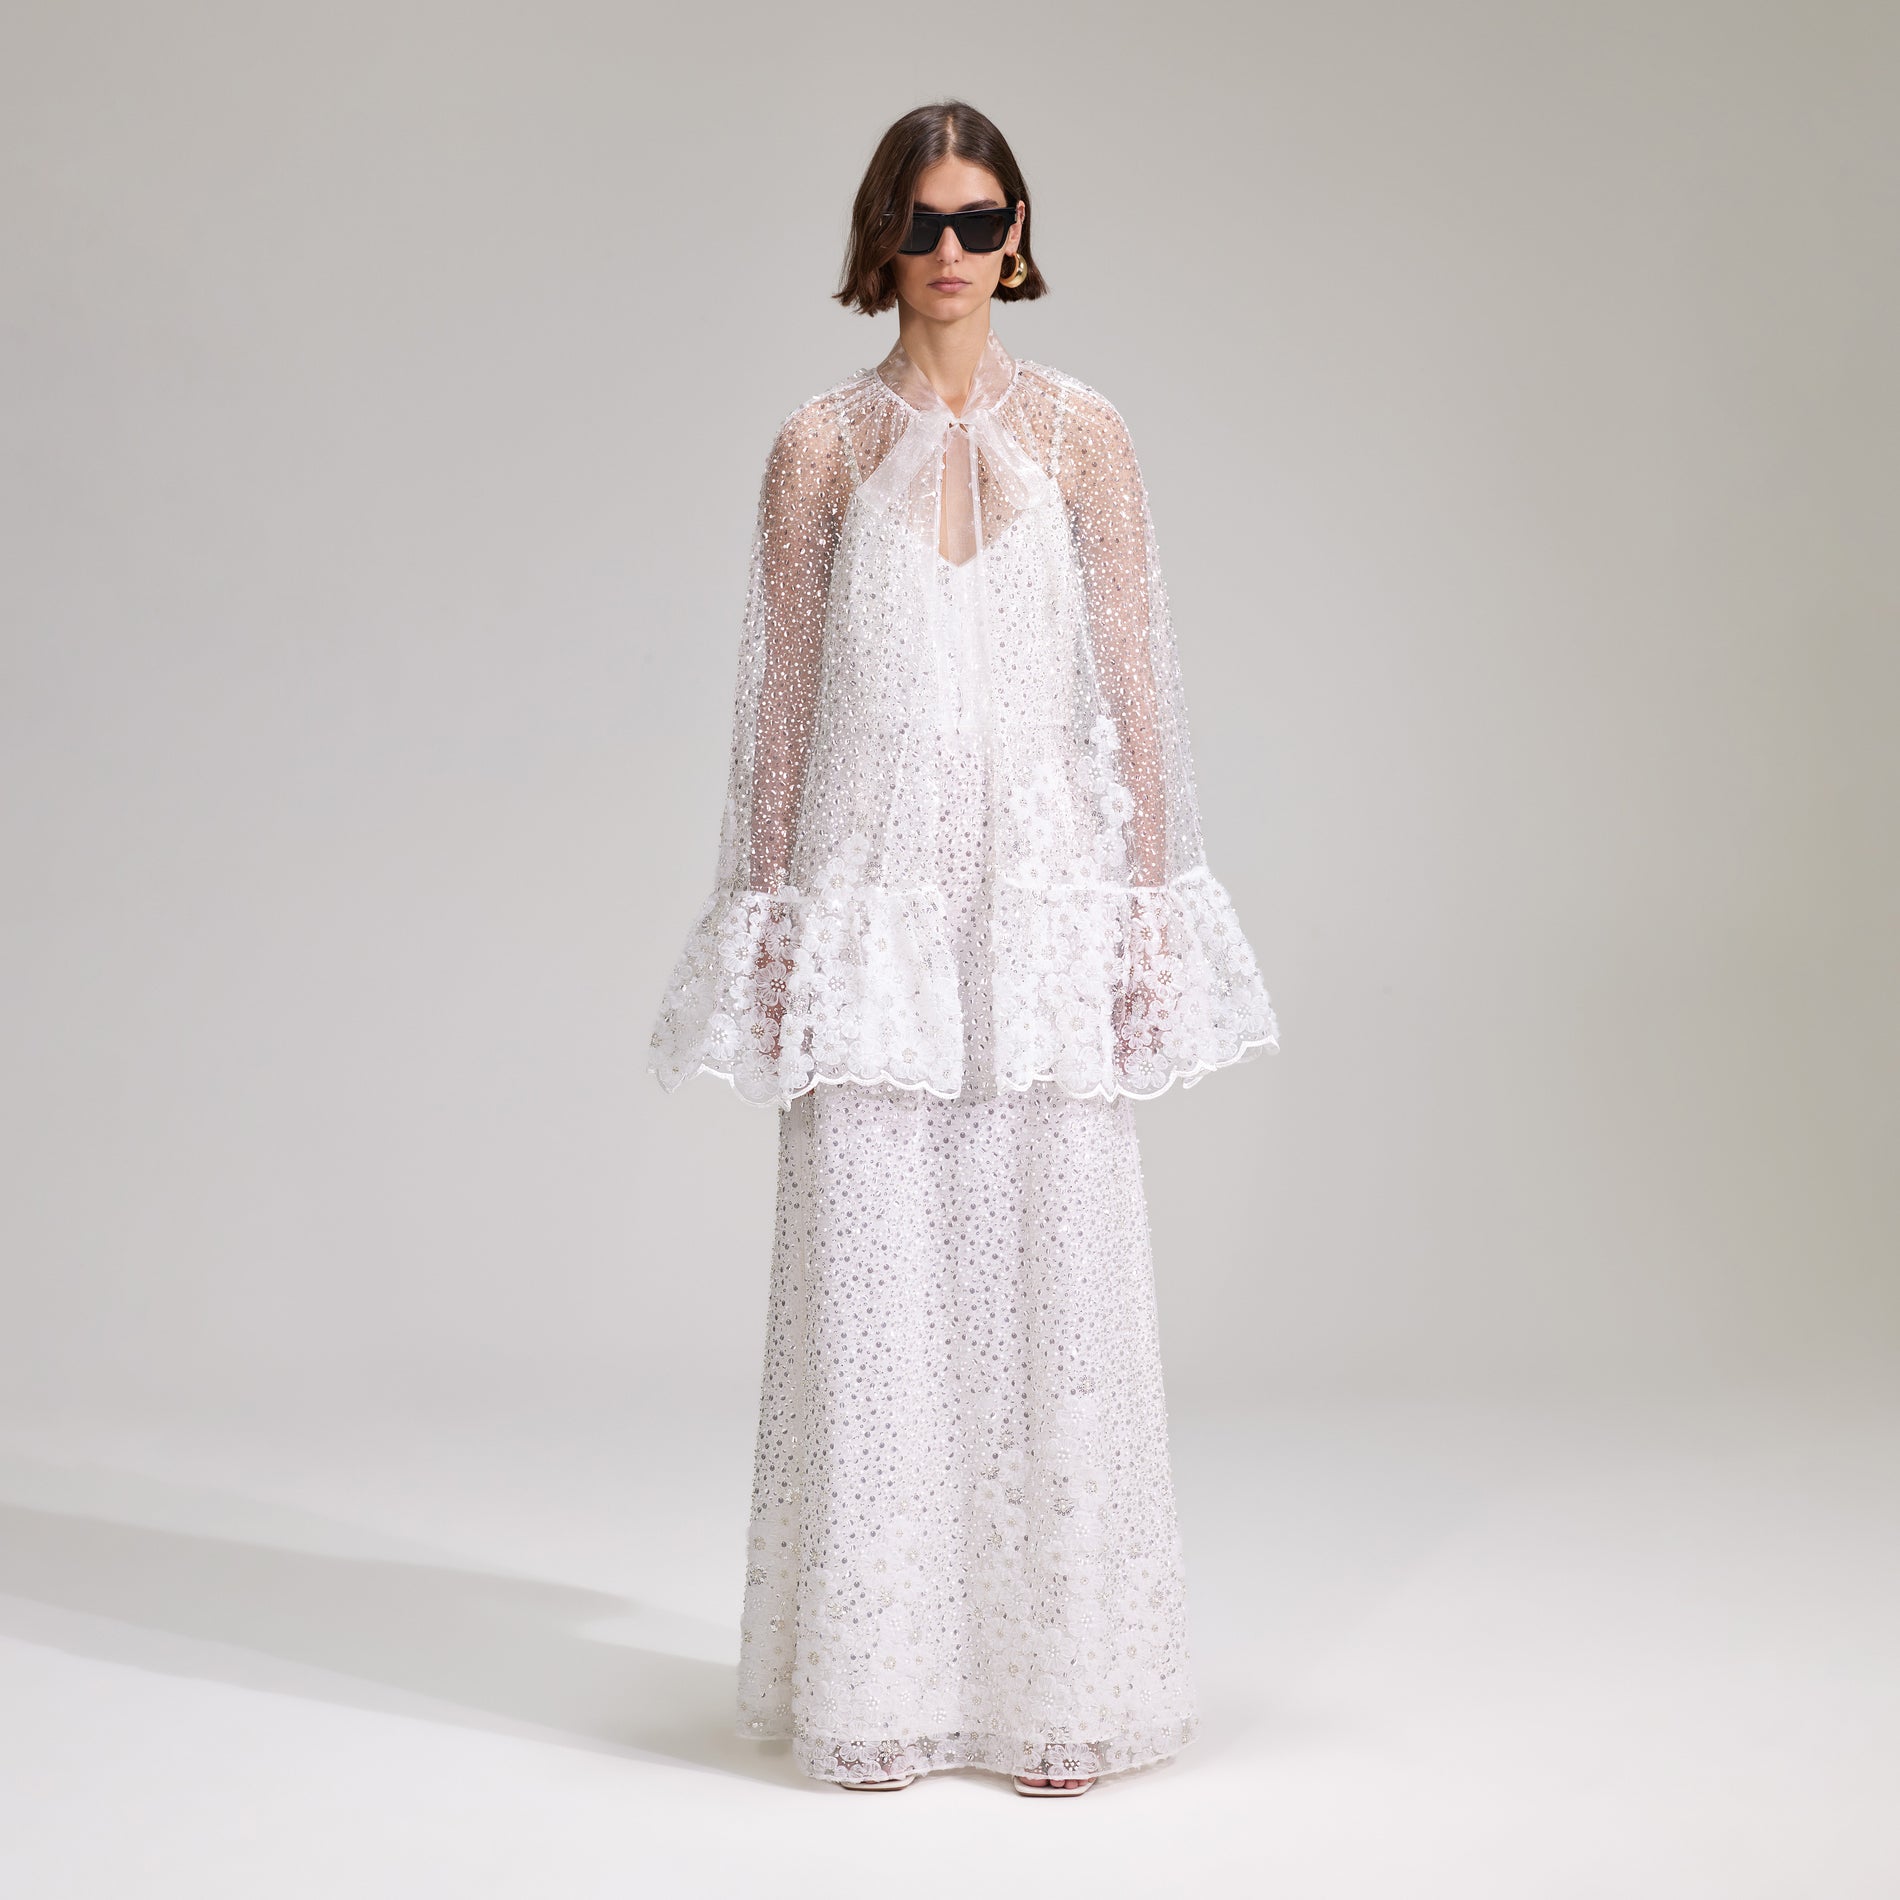 A woman wearing the White Beaded Sequin Mini Cape